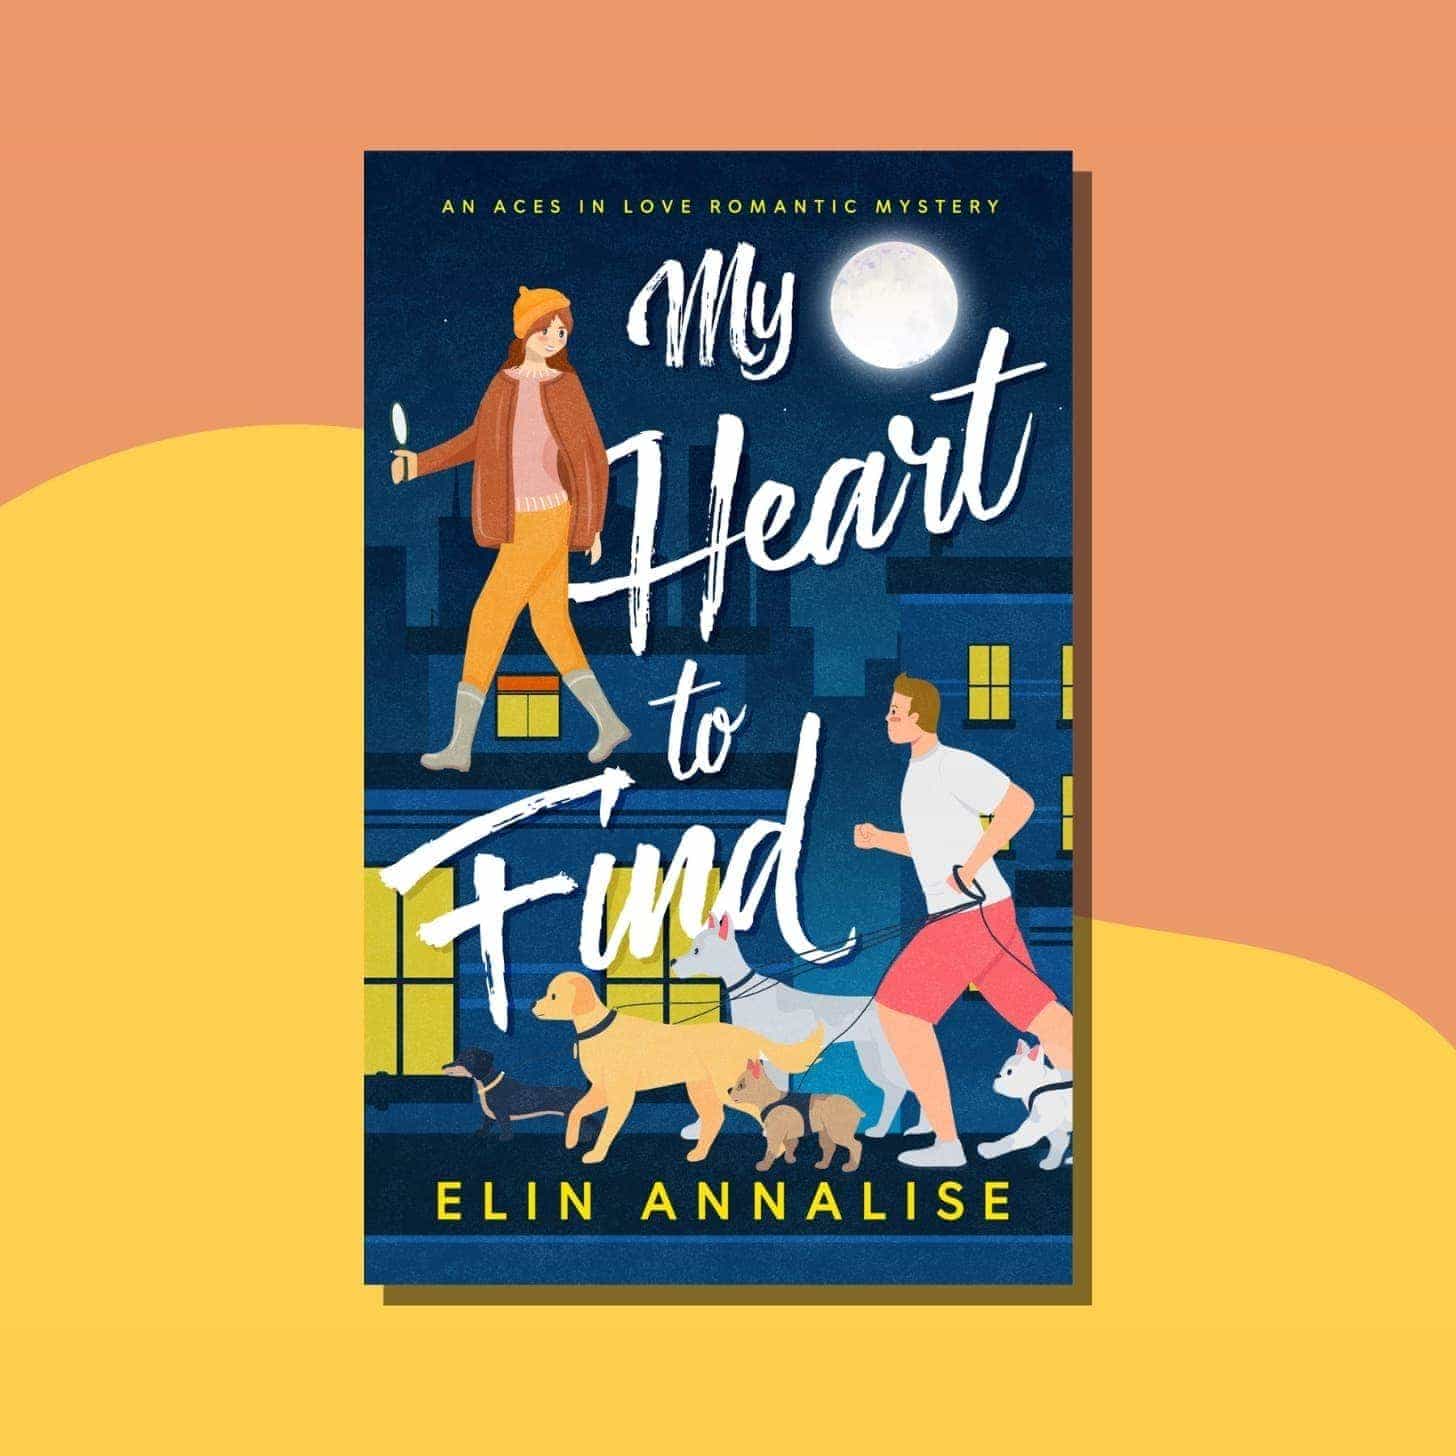 “My Heart to Find: An Aces in Love Romantic Mystery” by Elin Annalise - cover includes an illustration of a woman on a walk and a man on a walk with dogs